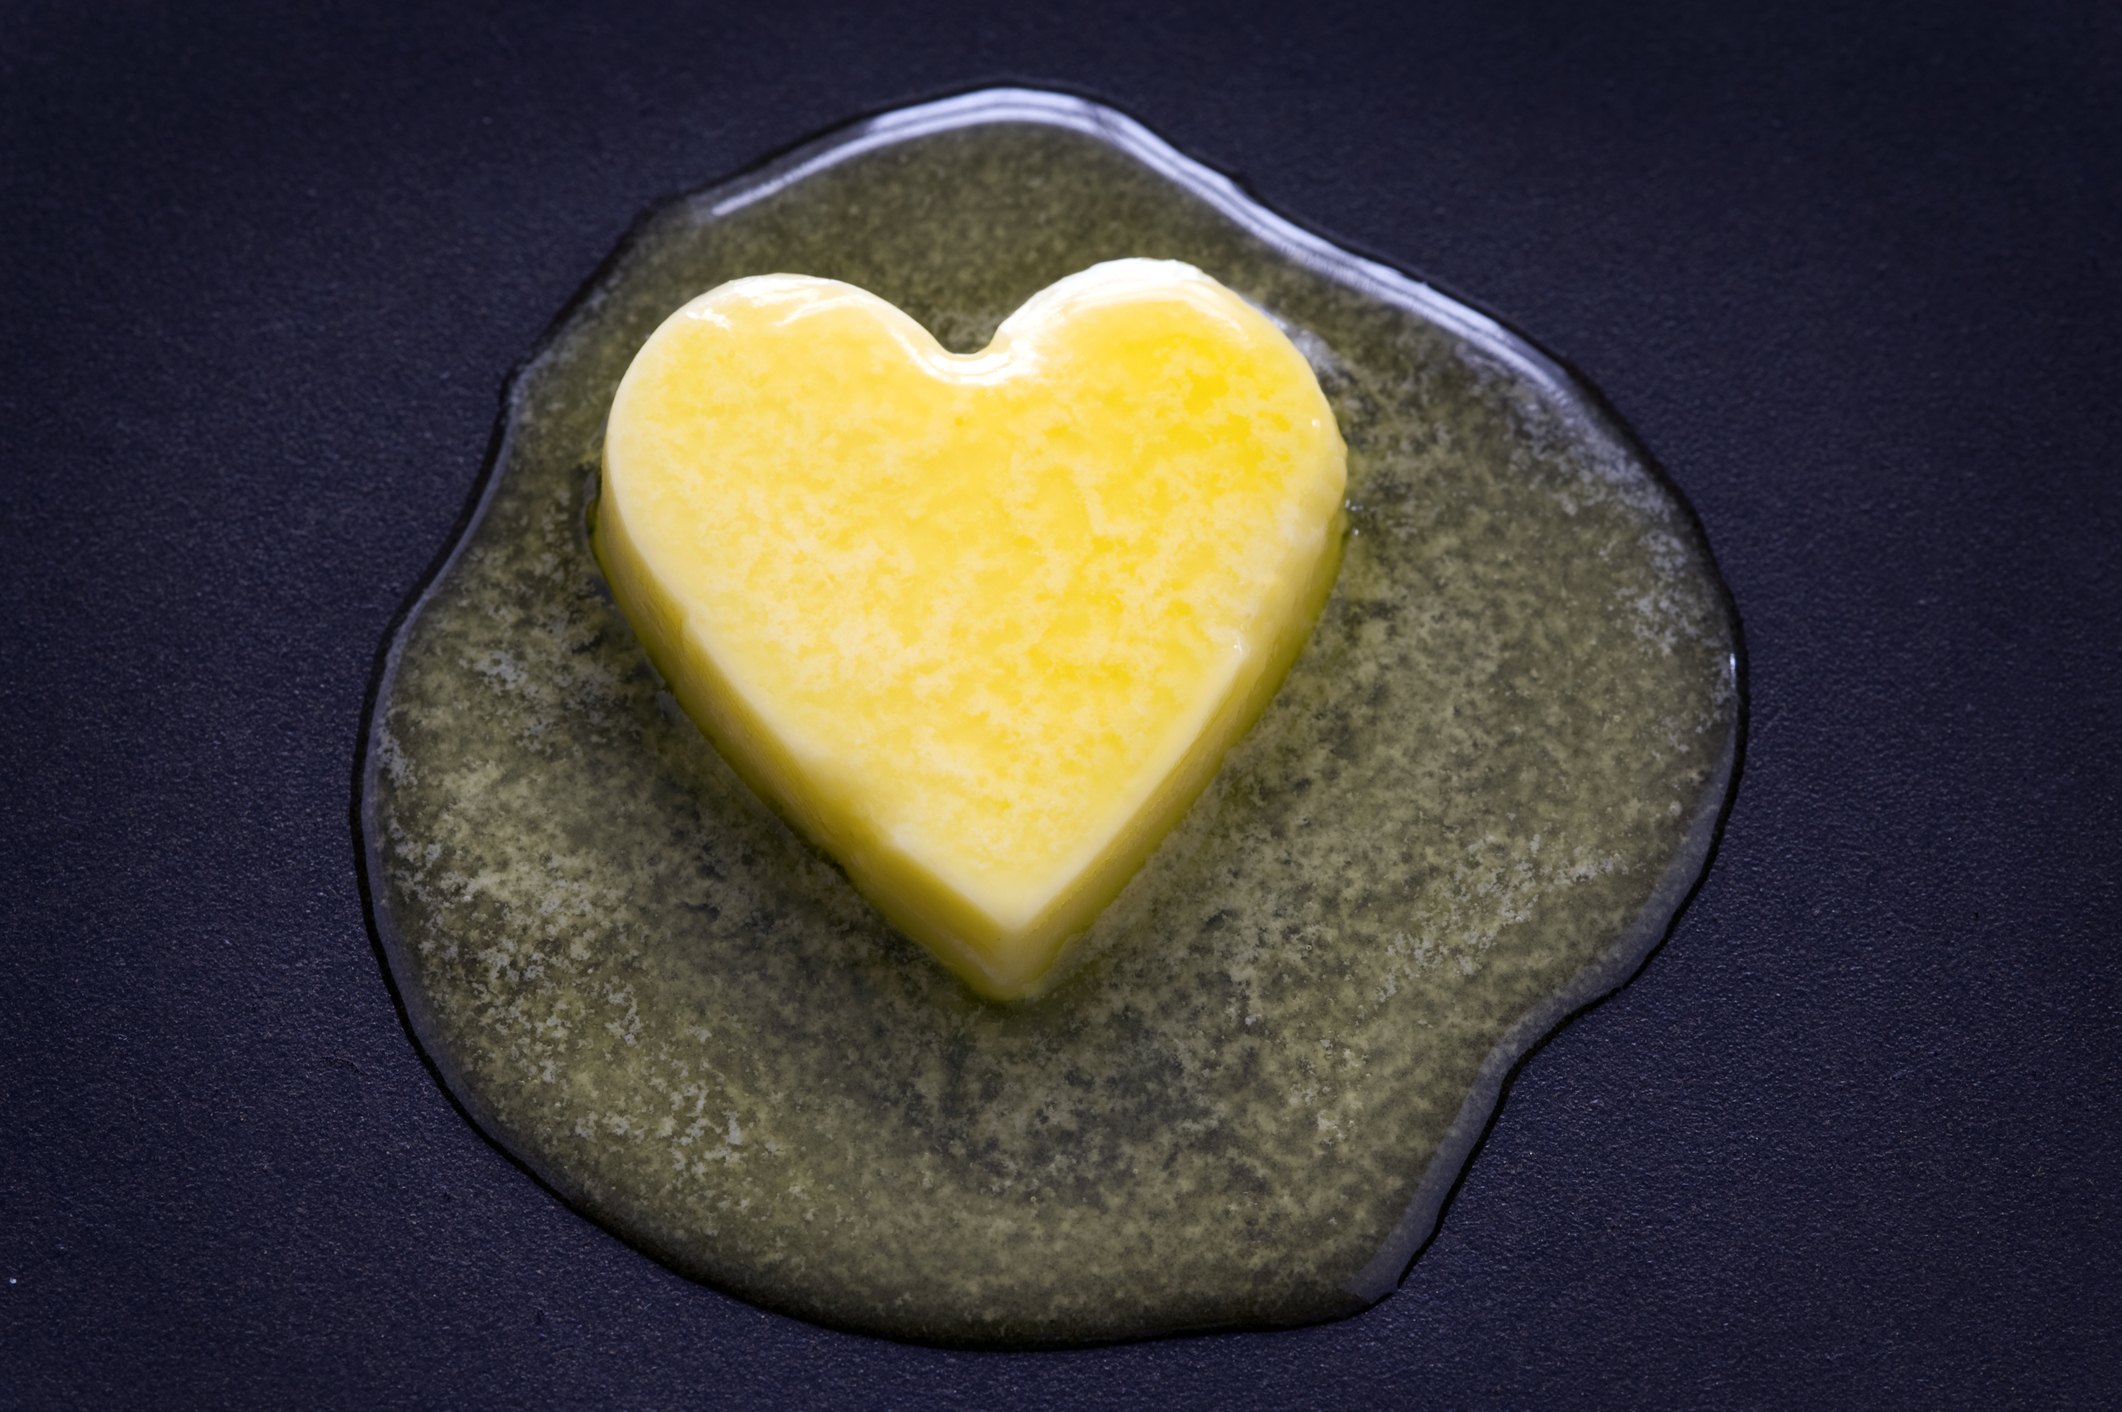 Is butter back? The truth about saturated fat